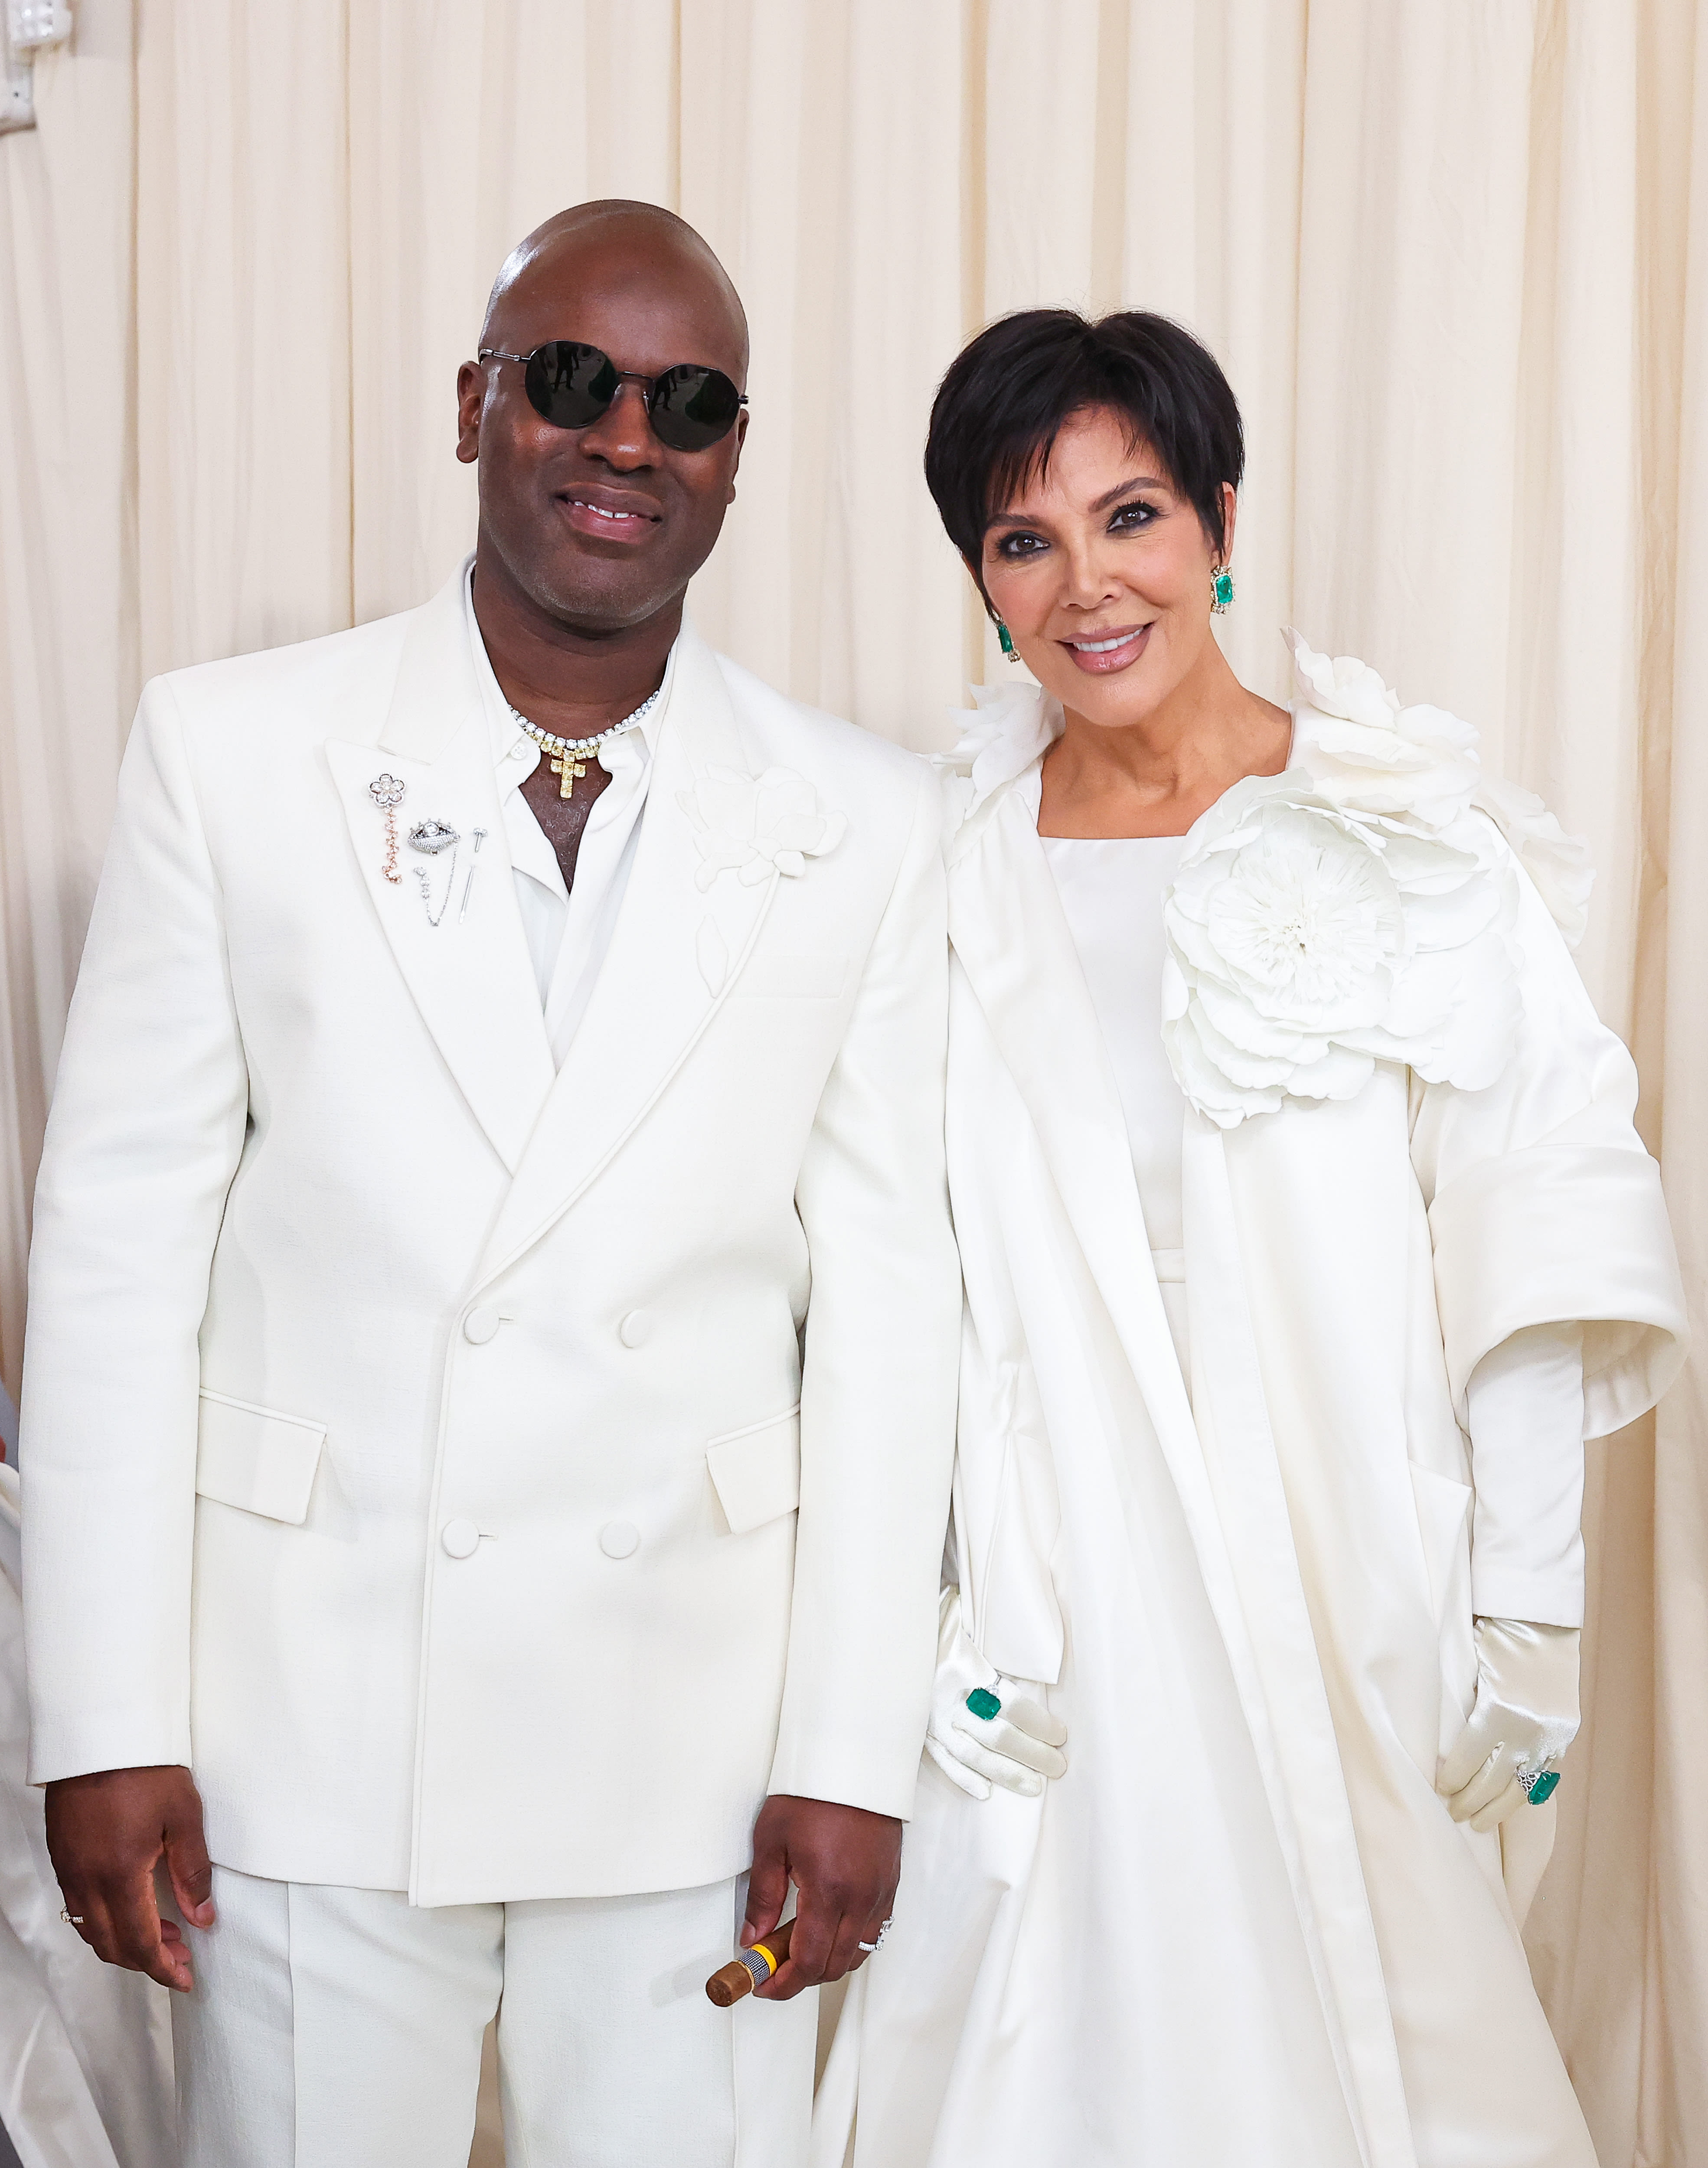 Kris Jenner Says Corey Gamble Taught Her ‘Age Is Just a Number’ Amid Romance: ‘We Have a Great Time’